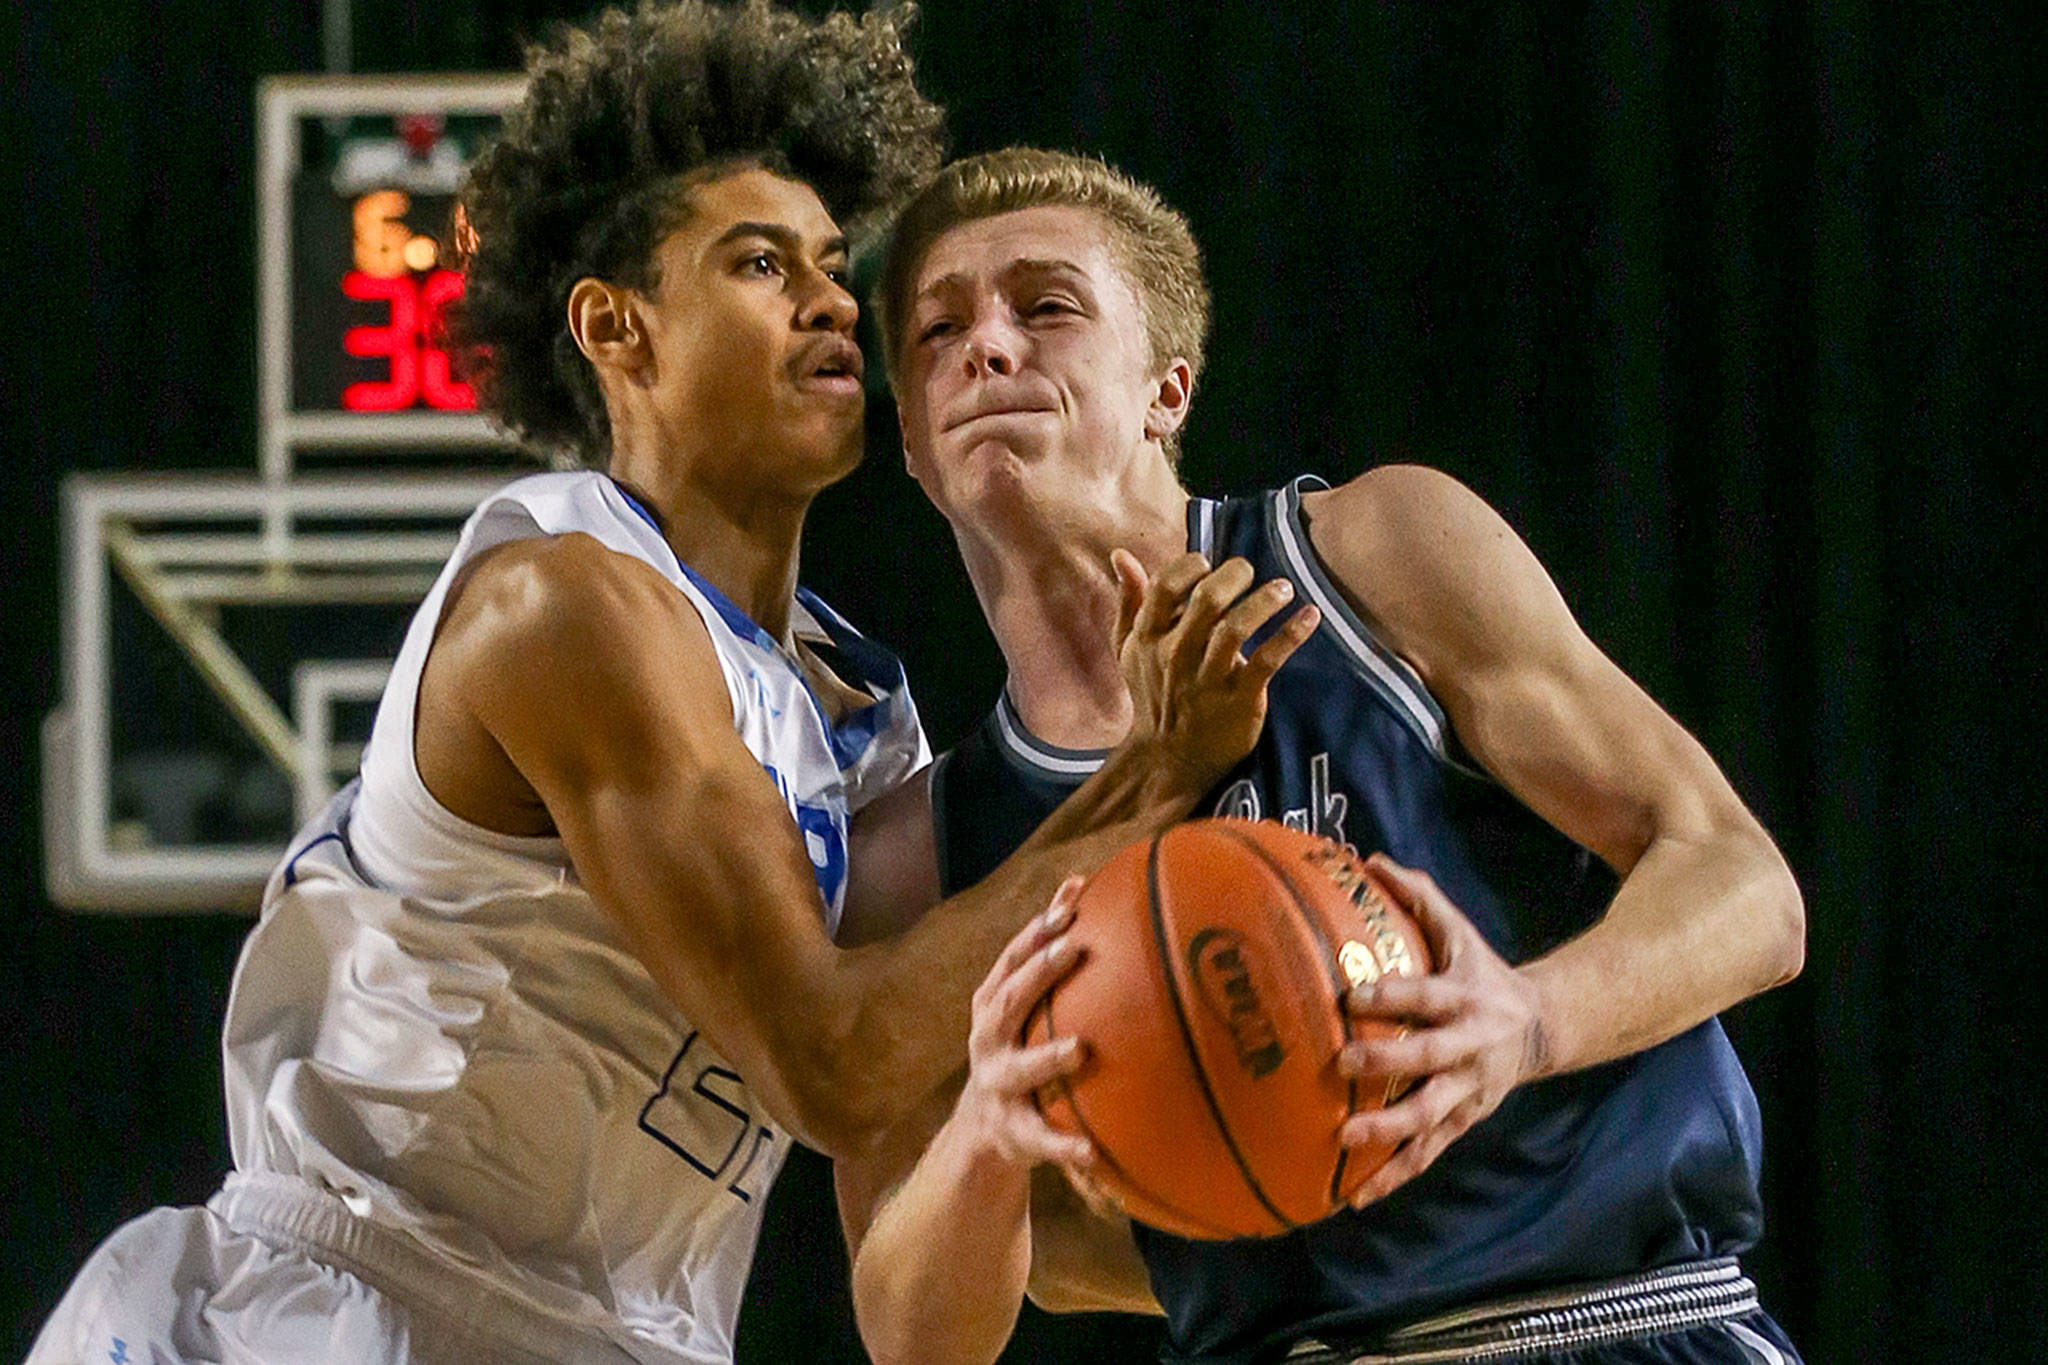 Glacier Peak’s Evan Mannes drives the lane with Curtis’ Josiah Miller defending during a Hardwood Classic game Feb. 27 at the Tacoma Dome. (Kevin Clark / The Herald)